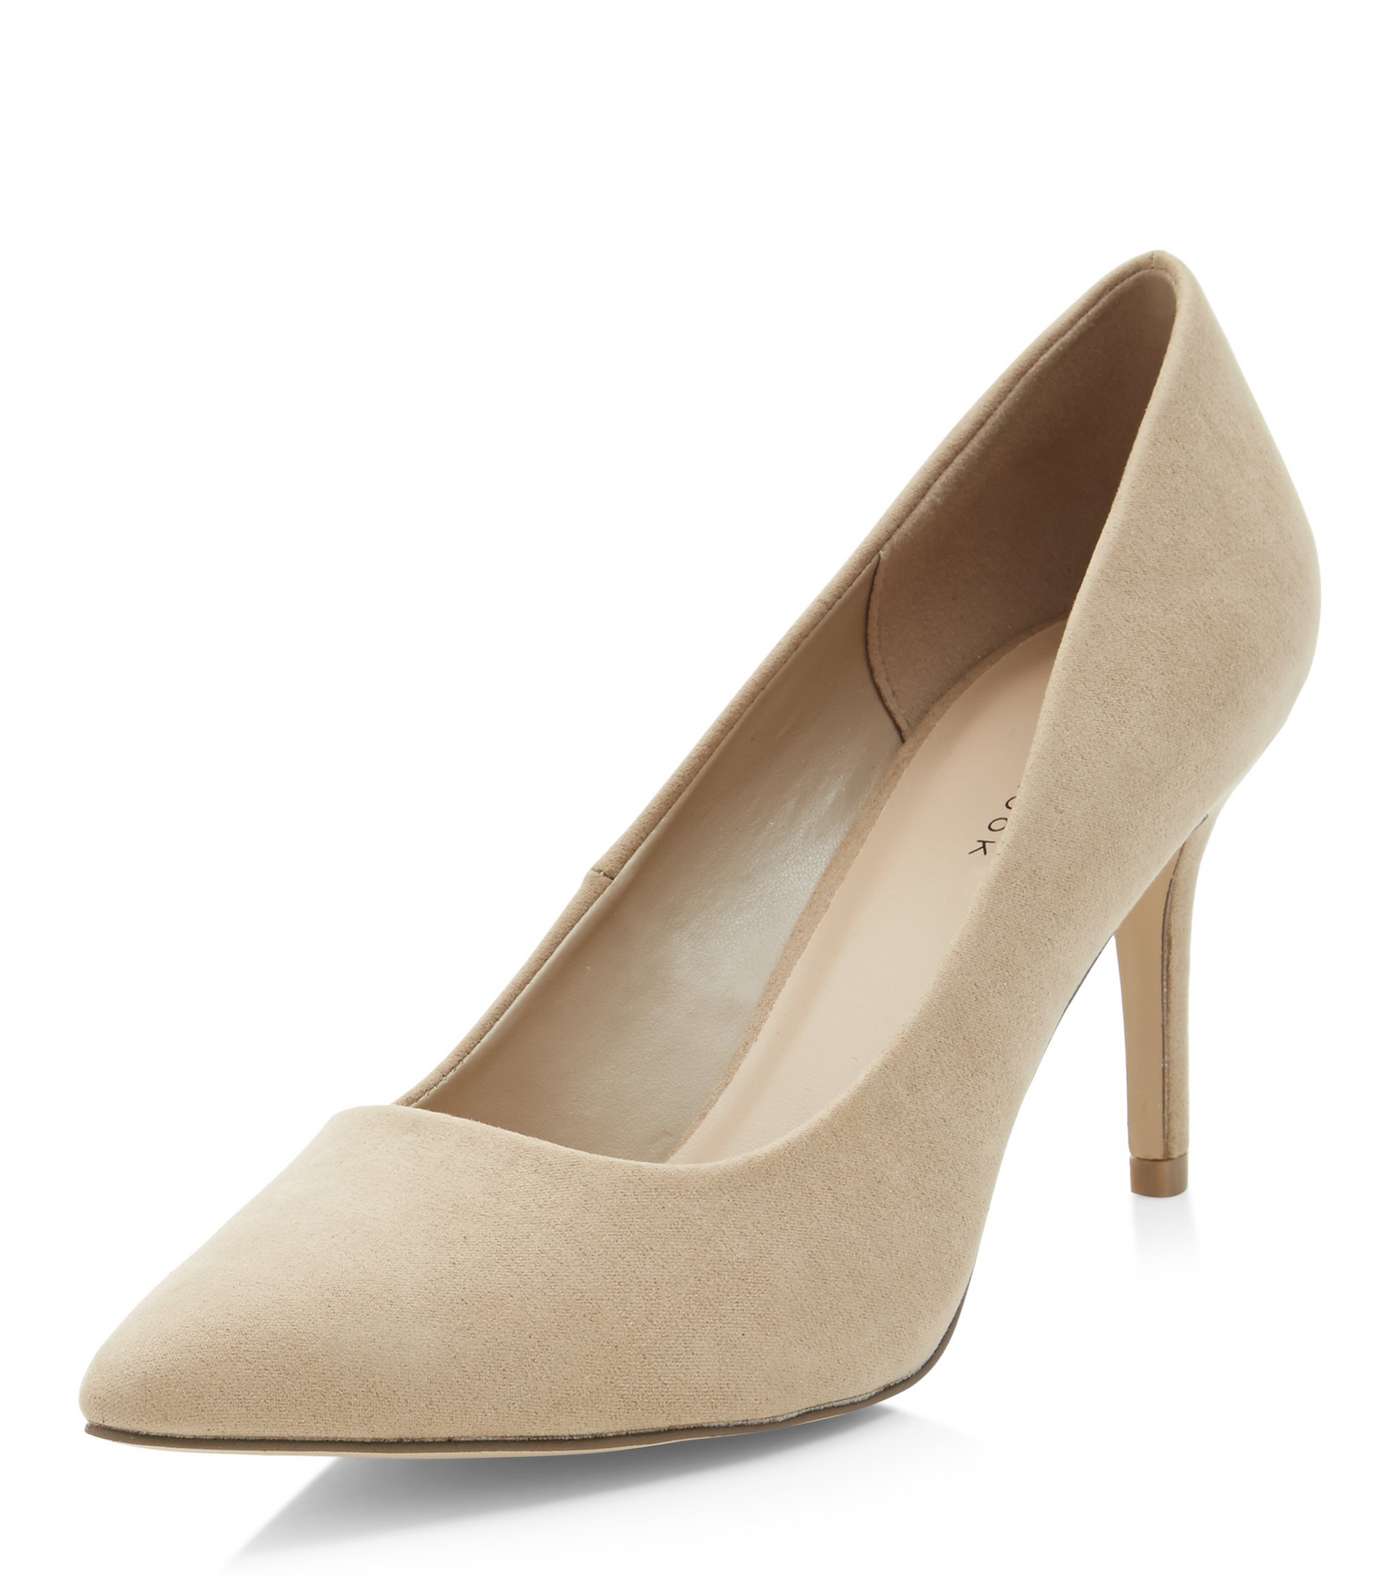 Stone Suedette Mid Heel Pointed Court Shoes Image 5